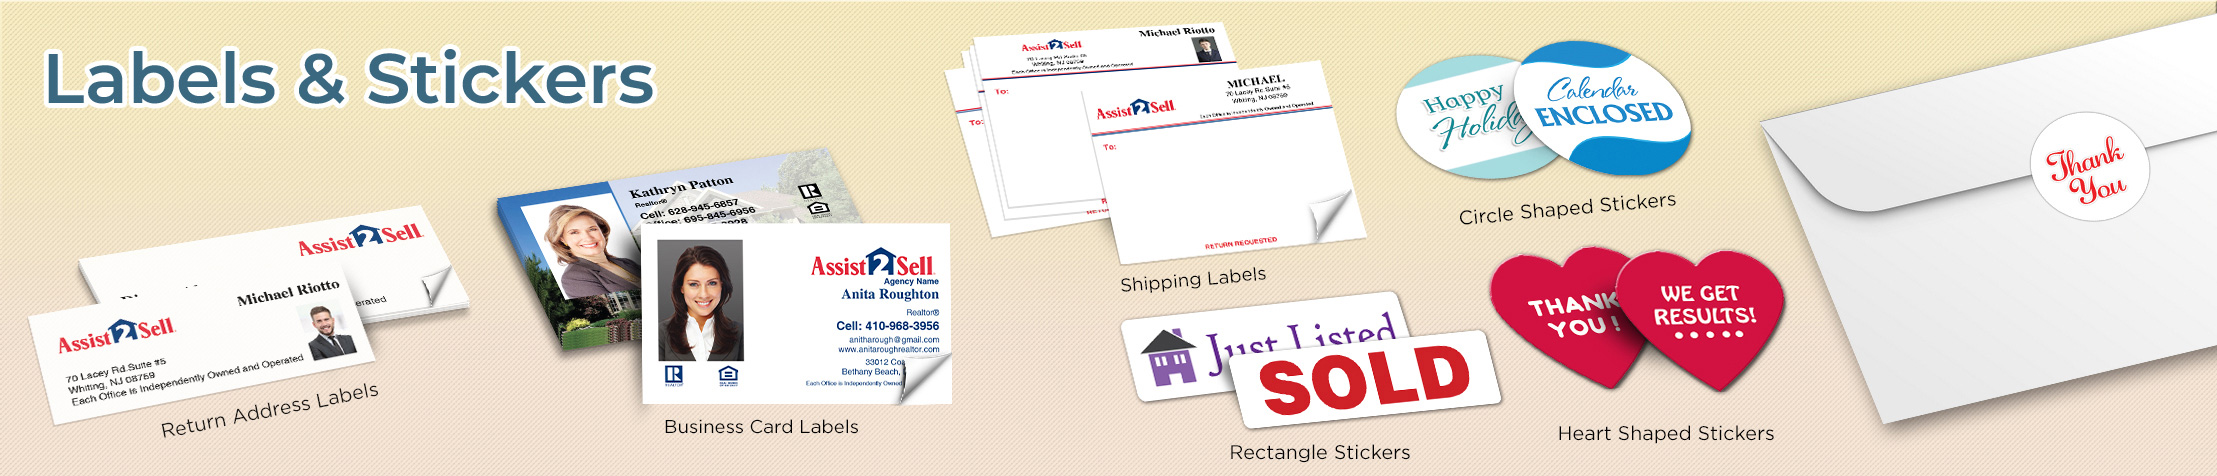 Assit2Sell Real Estate Labels and Stickers - Assit2Sell Real Estate  business card labels, return address labels, shipping labels, and assorted stickers | BestPrintBuy.com